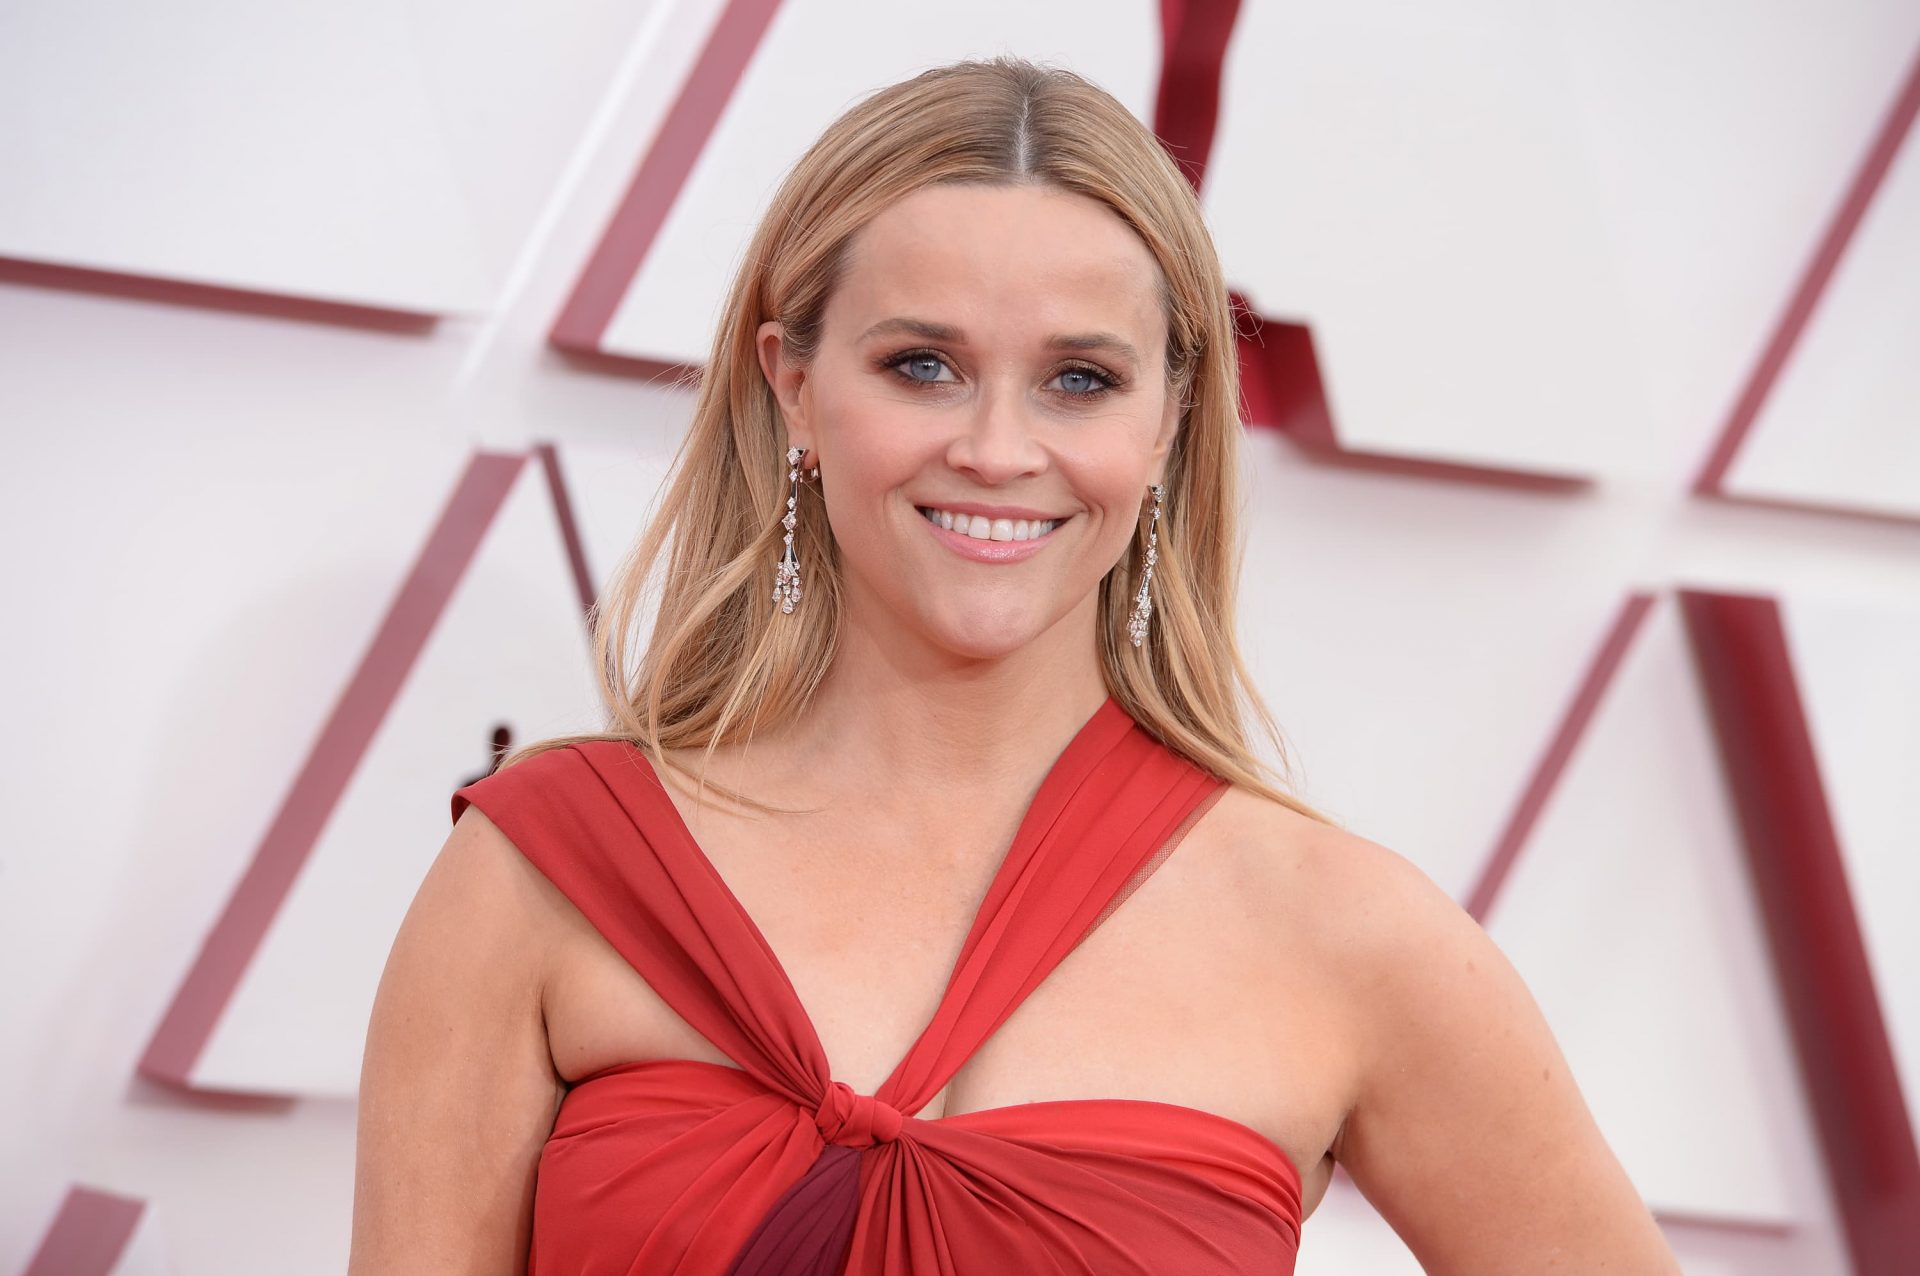 Reese Witherspoon’s Hello Sunshine to be equipped to Blackstone-backed media company for $900 million